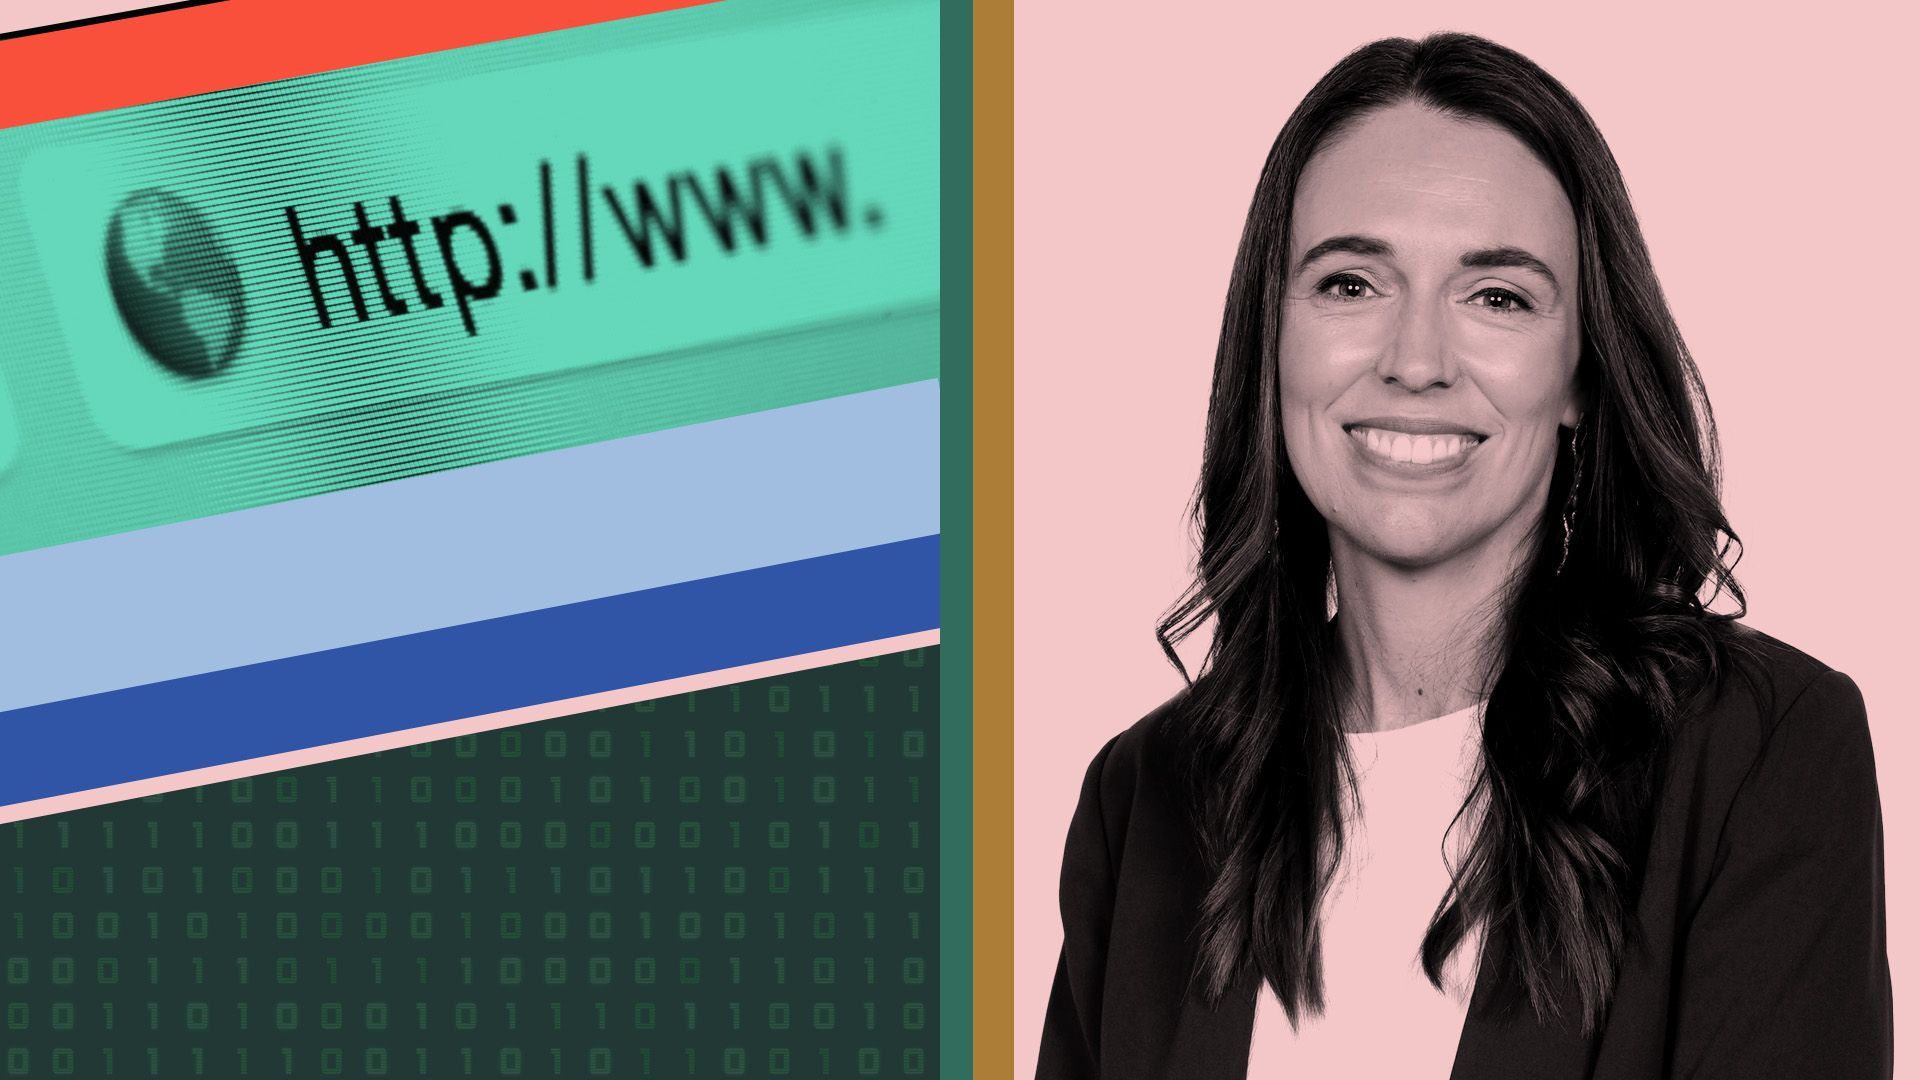 Photo illustration of Former Prime Minister of New Zealand Jacinda Ardern next to binary code and an internet address bar